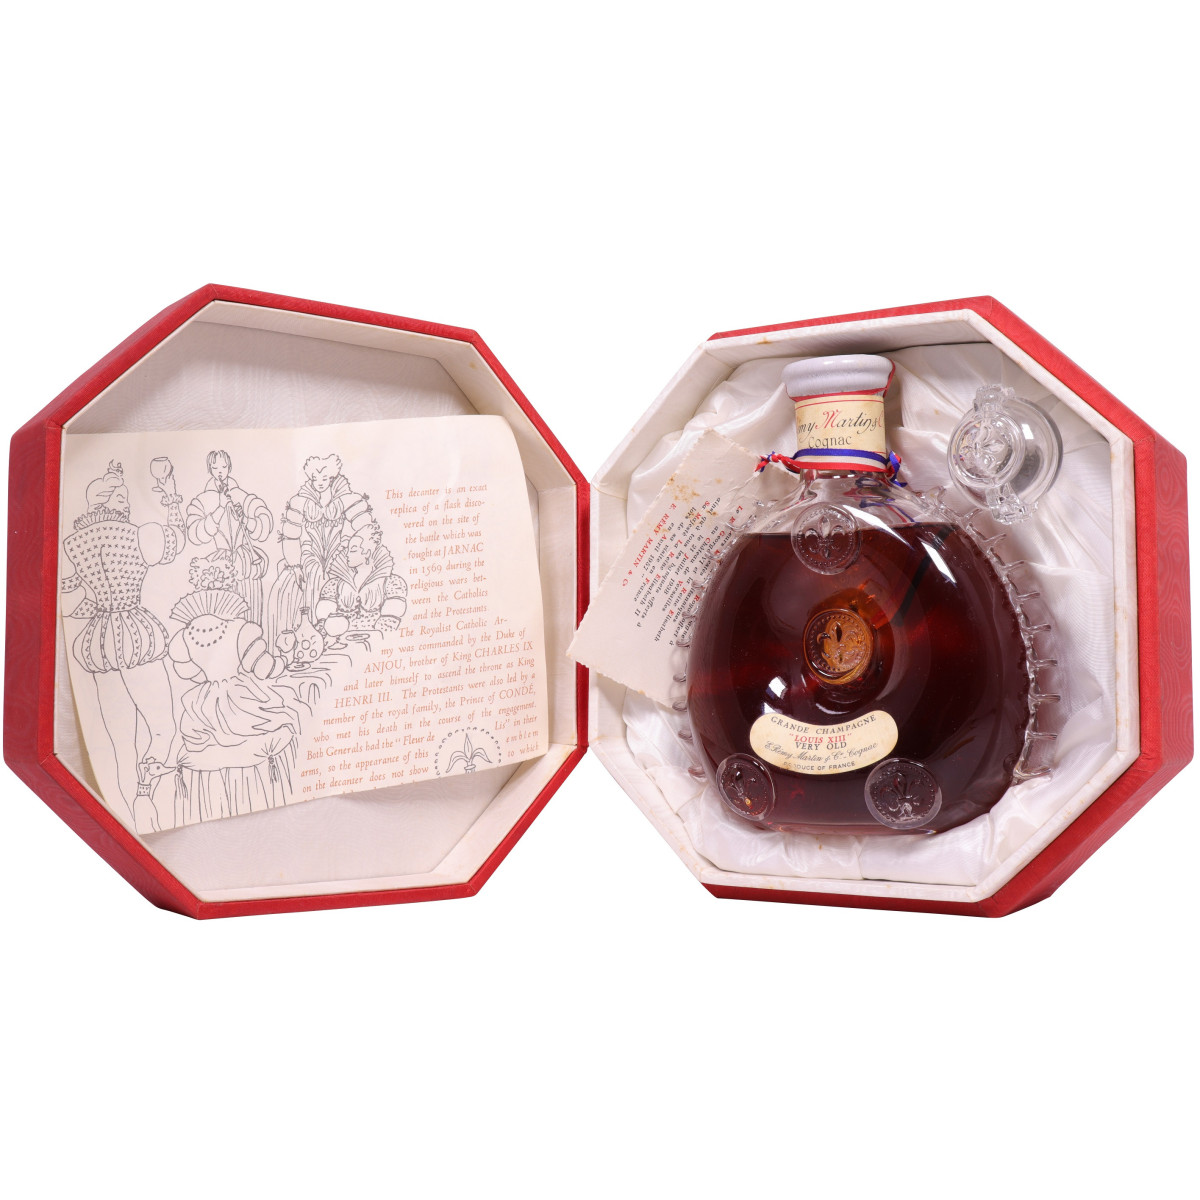 REMY MARTIN - LOUIS XIII - 1938 (without original box)